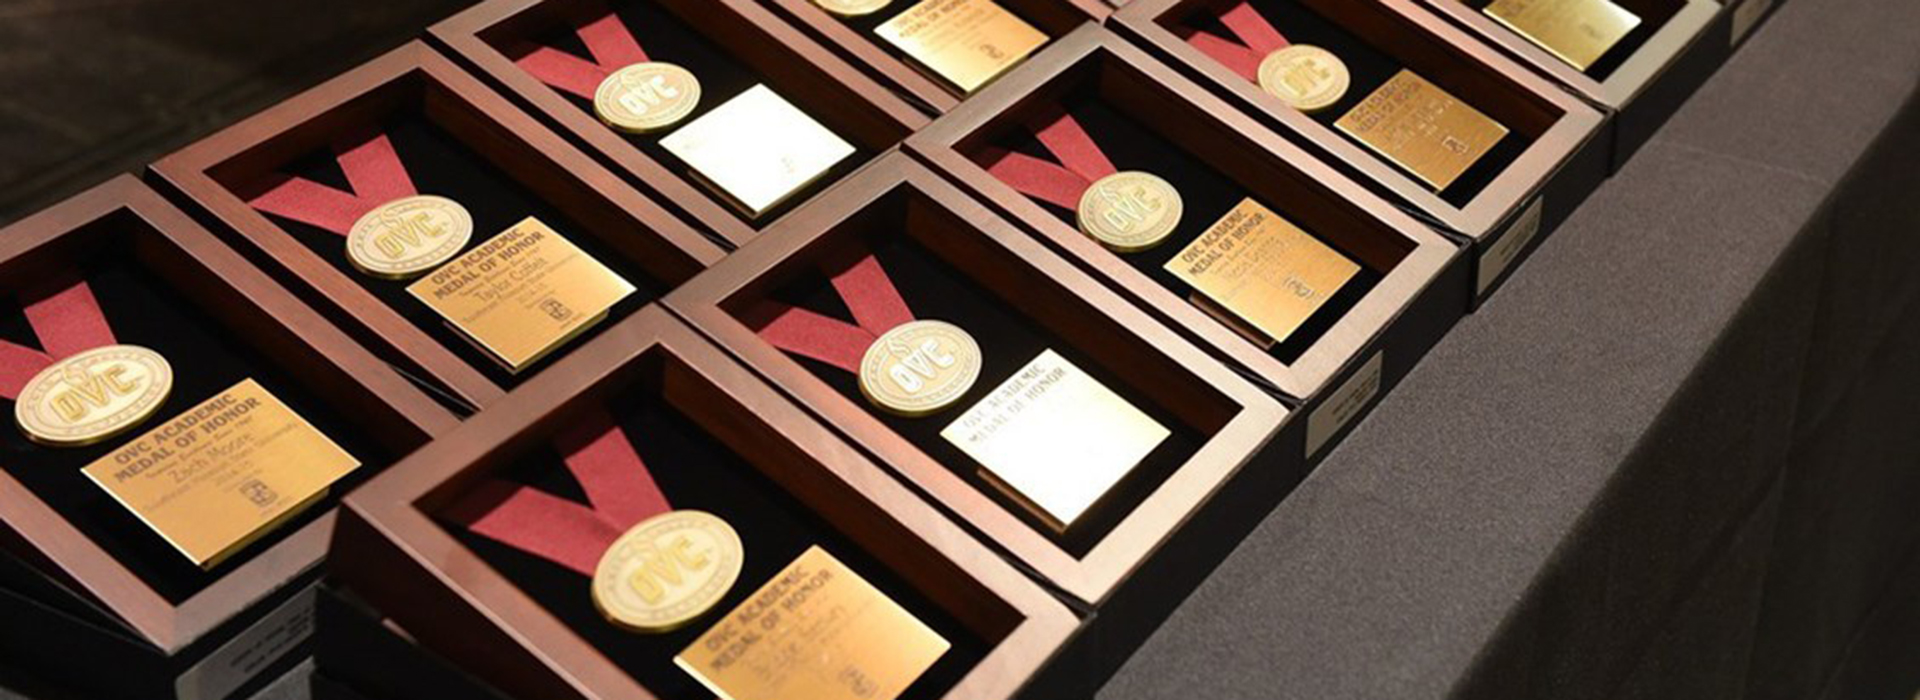 OVC Academic Medals of Honor see 24 Tech recipients